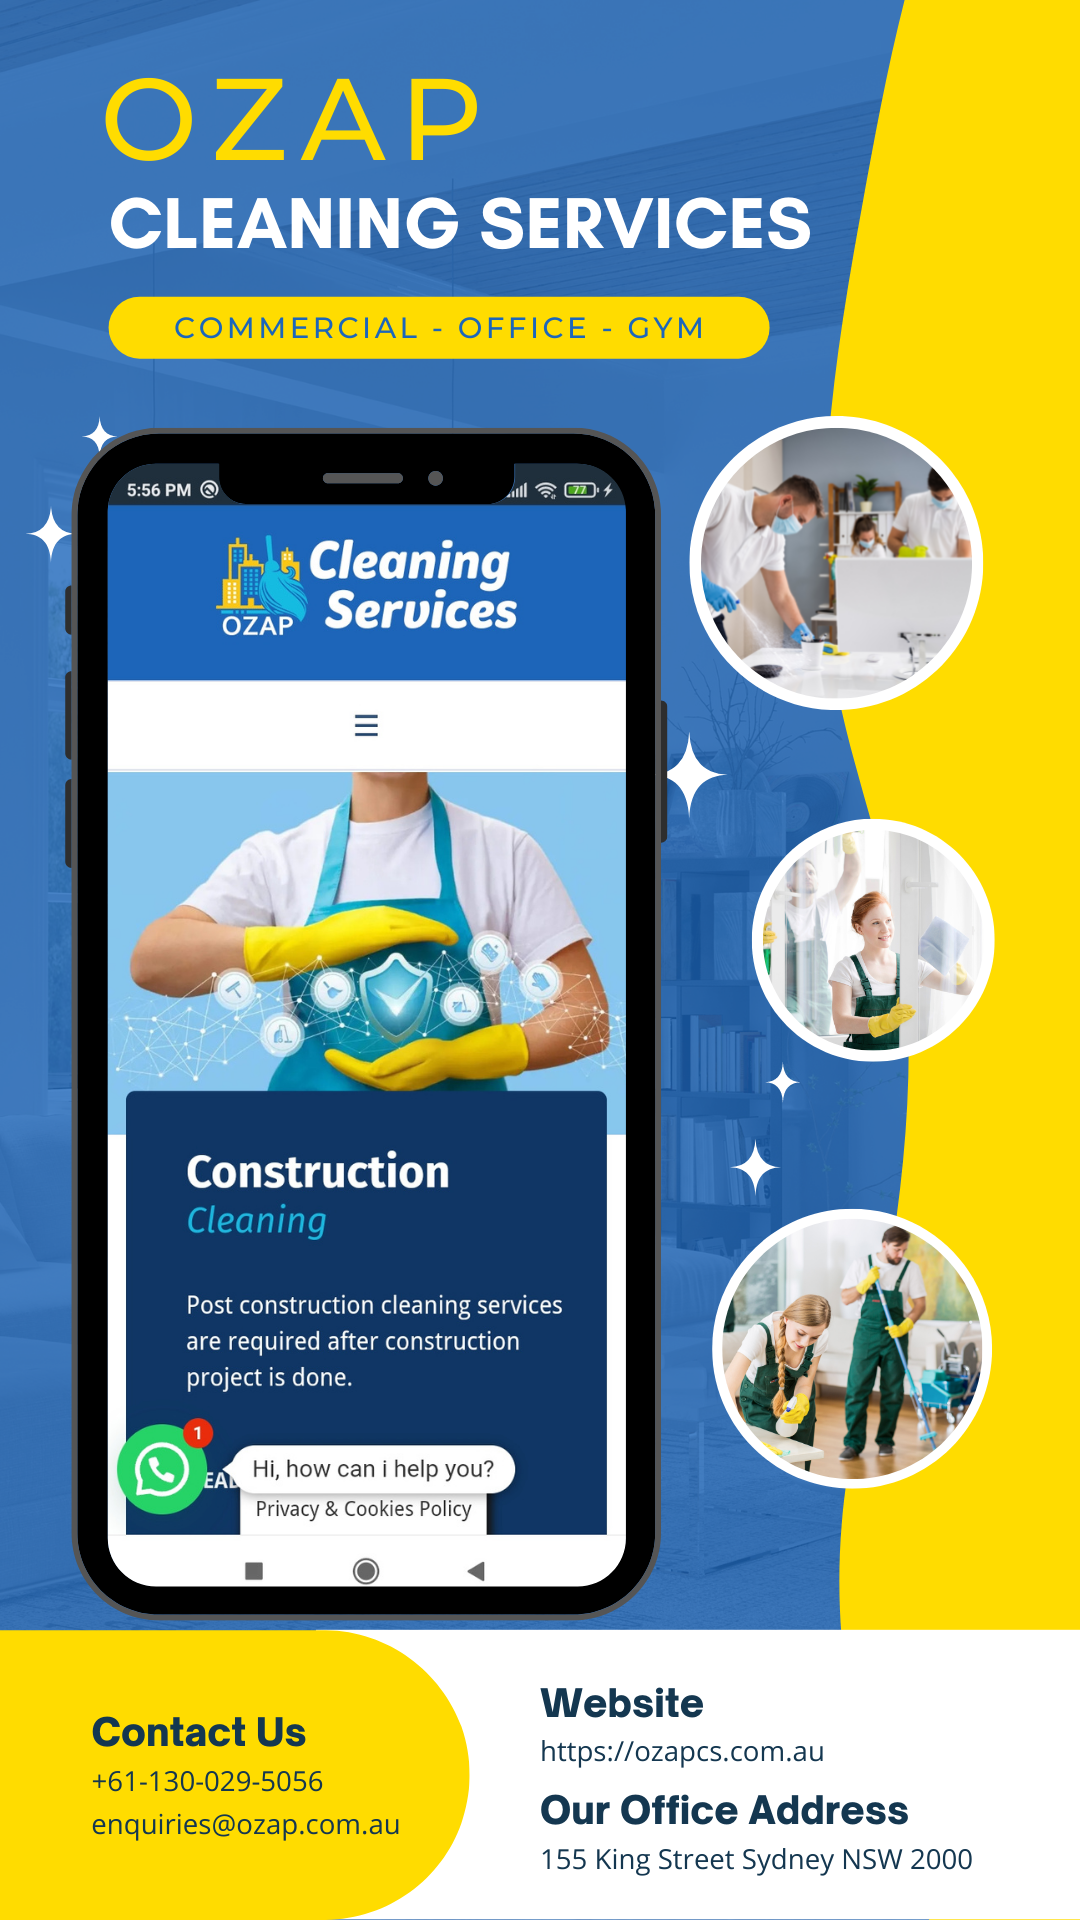 OZAP Cleaning Services Sydney